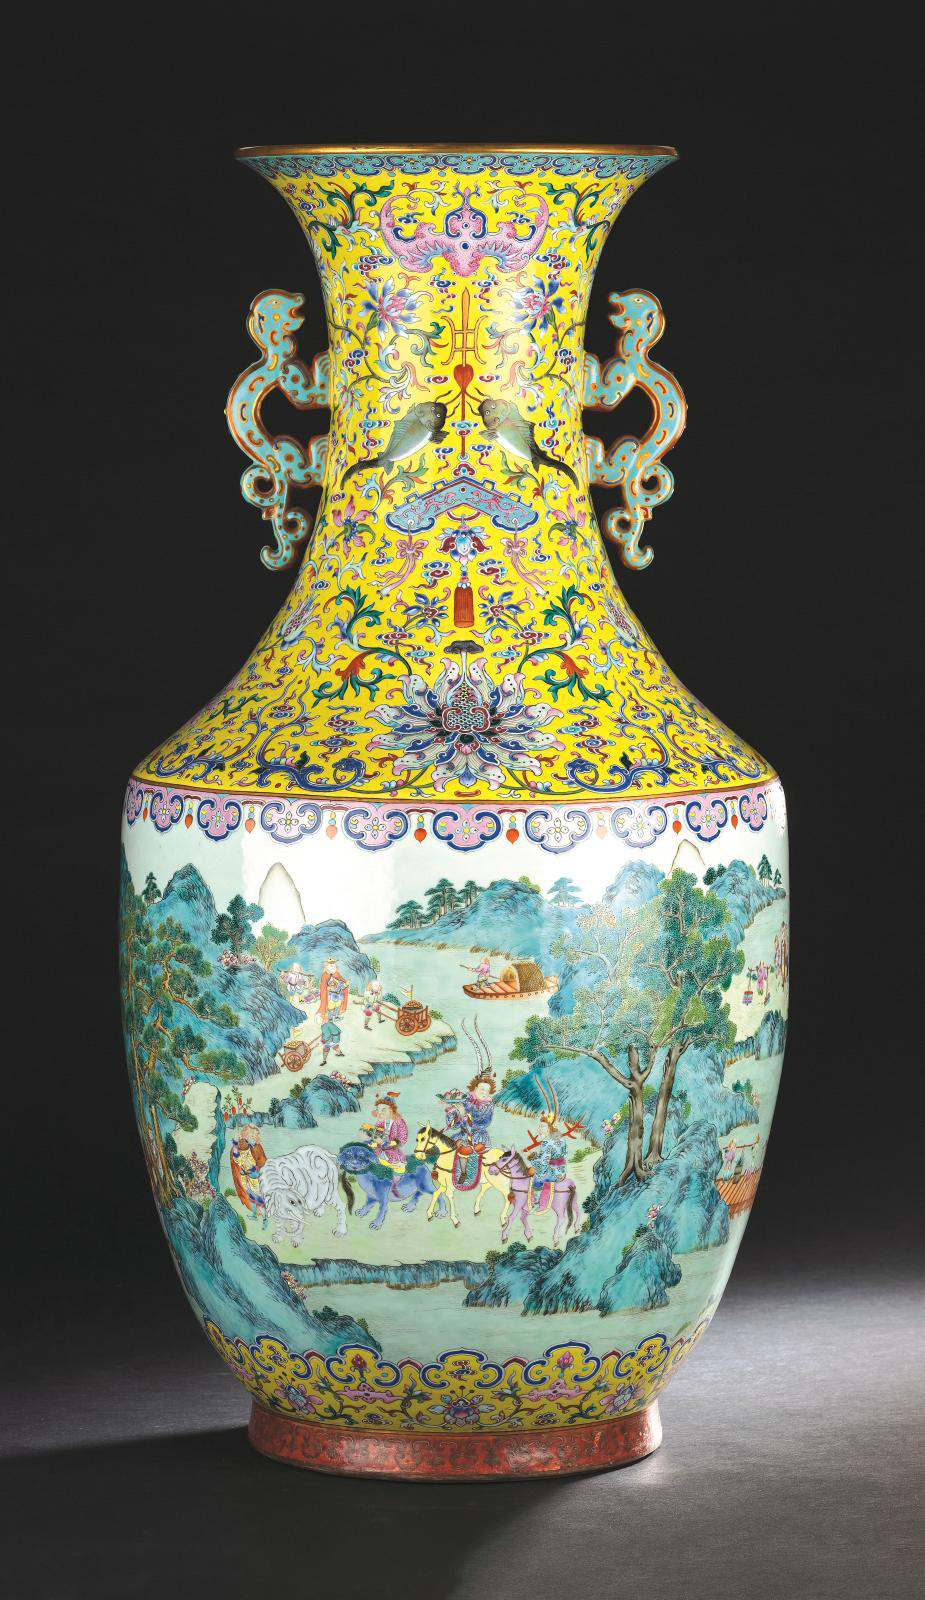 China, Qing dynasty, Jiaqing mark and period (1796-1820). Imperial famille rose porcelain vase, iron red six-character mark in juanshu, h.